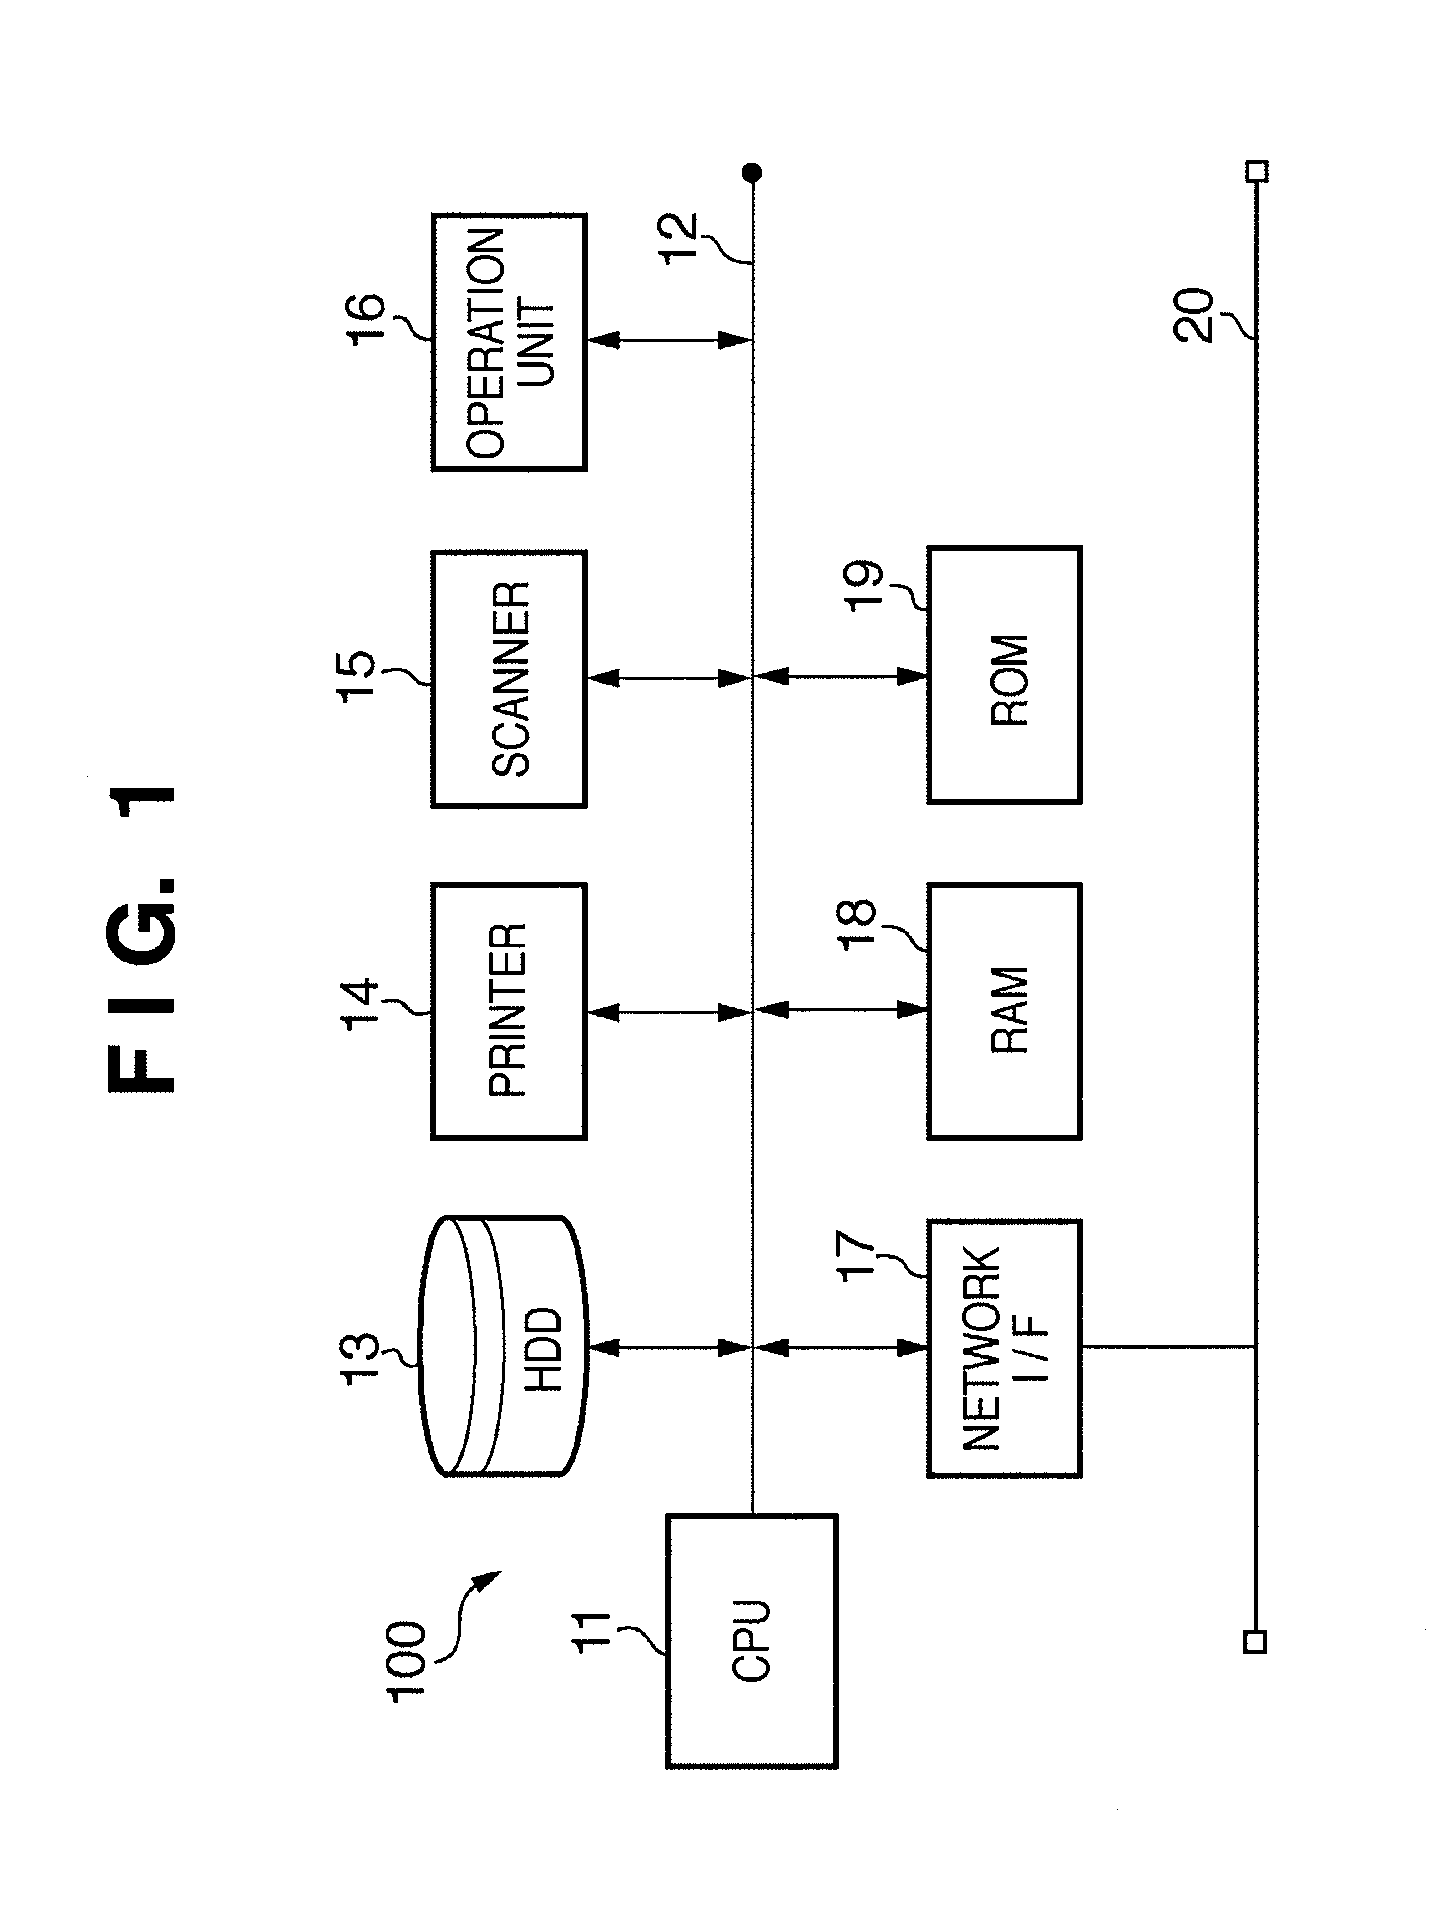 Image processing apparatus and processing method of the image processing apparatus